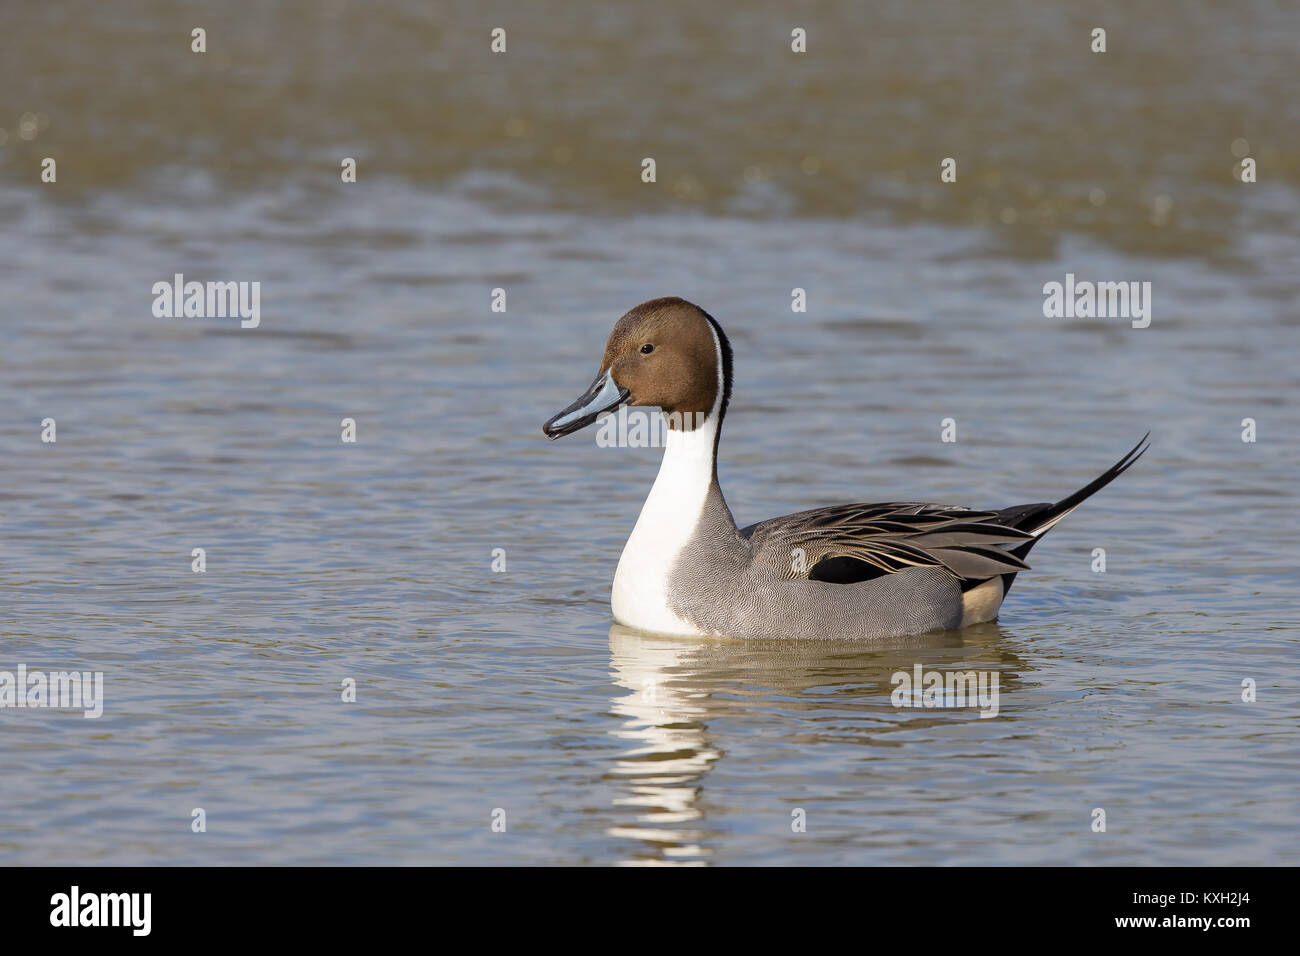 Side close up of wild, Northern pintail duck (Anas acuta) swimming isolated in calm UK lake in winter sun, facing left. Stock Photo